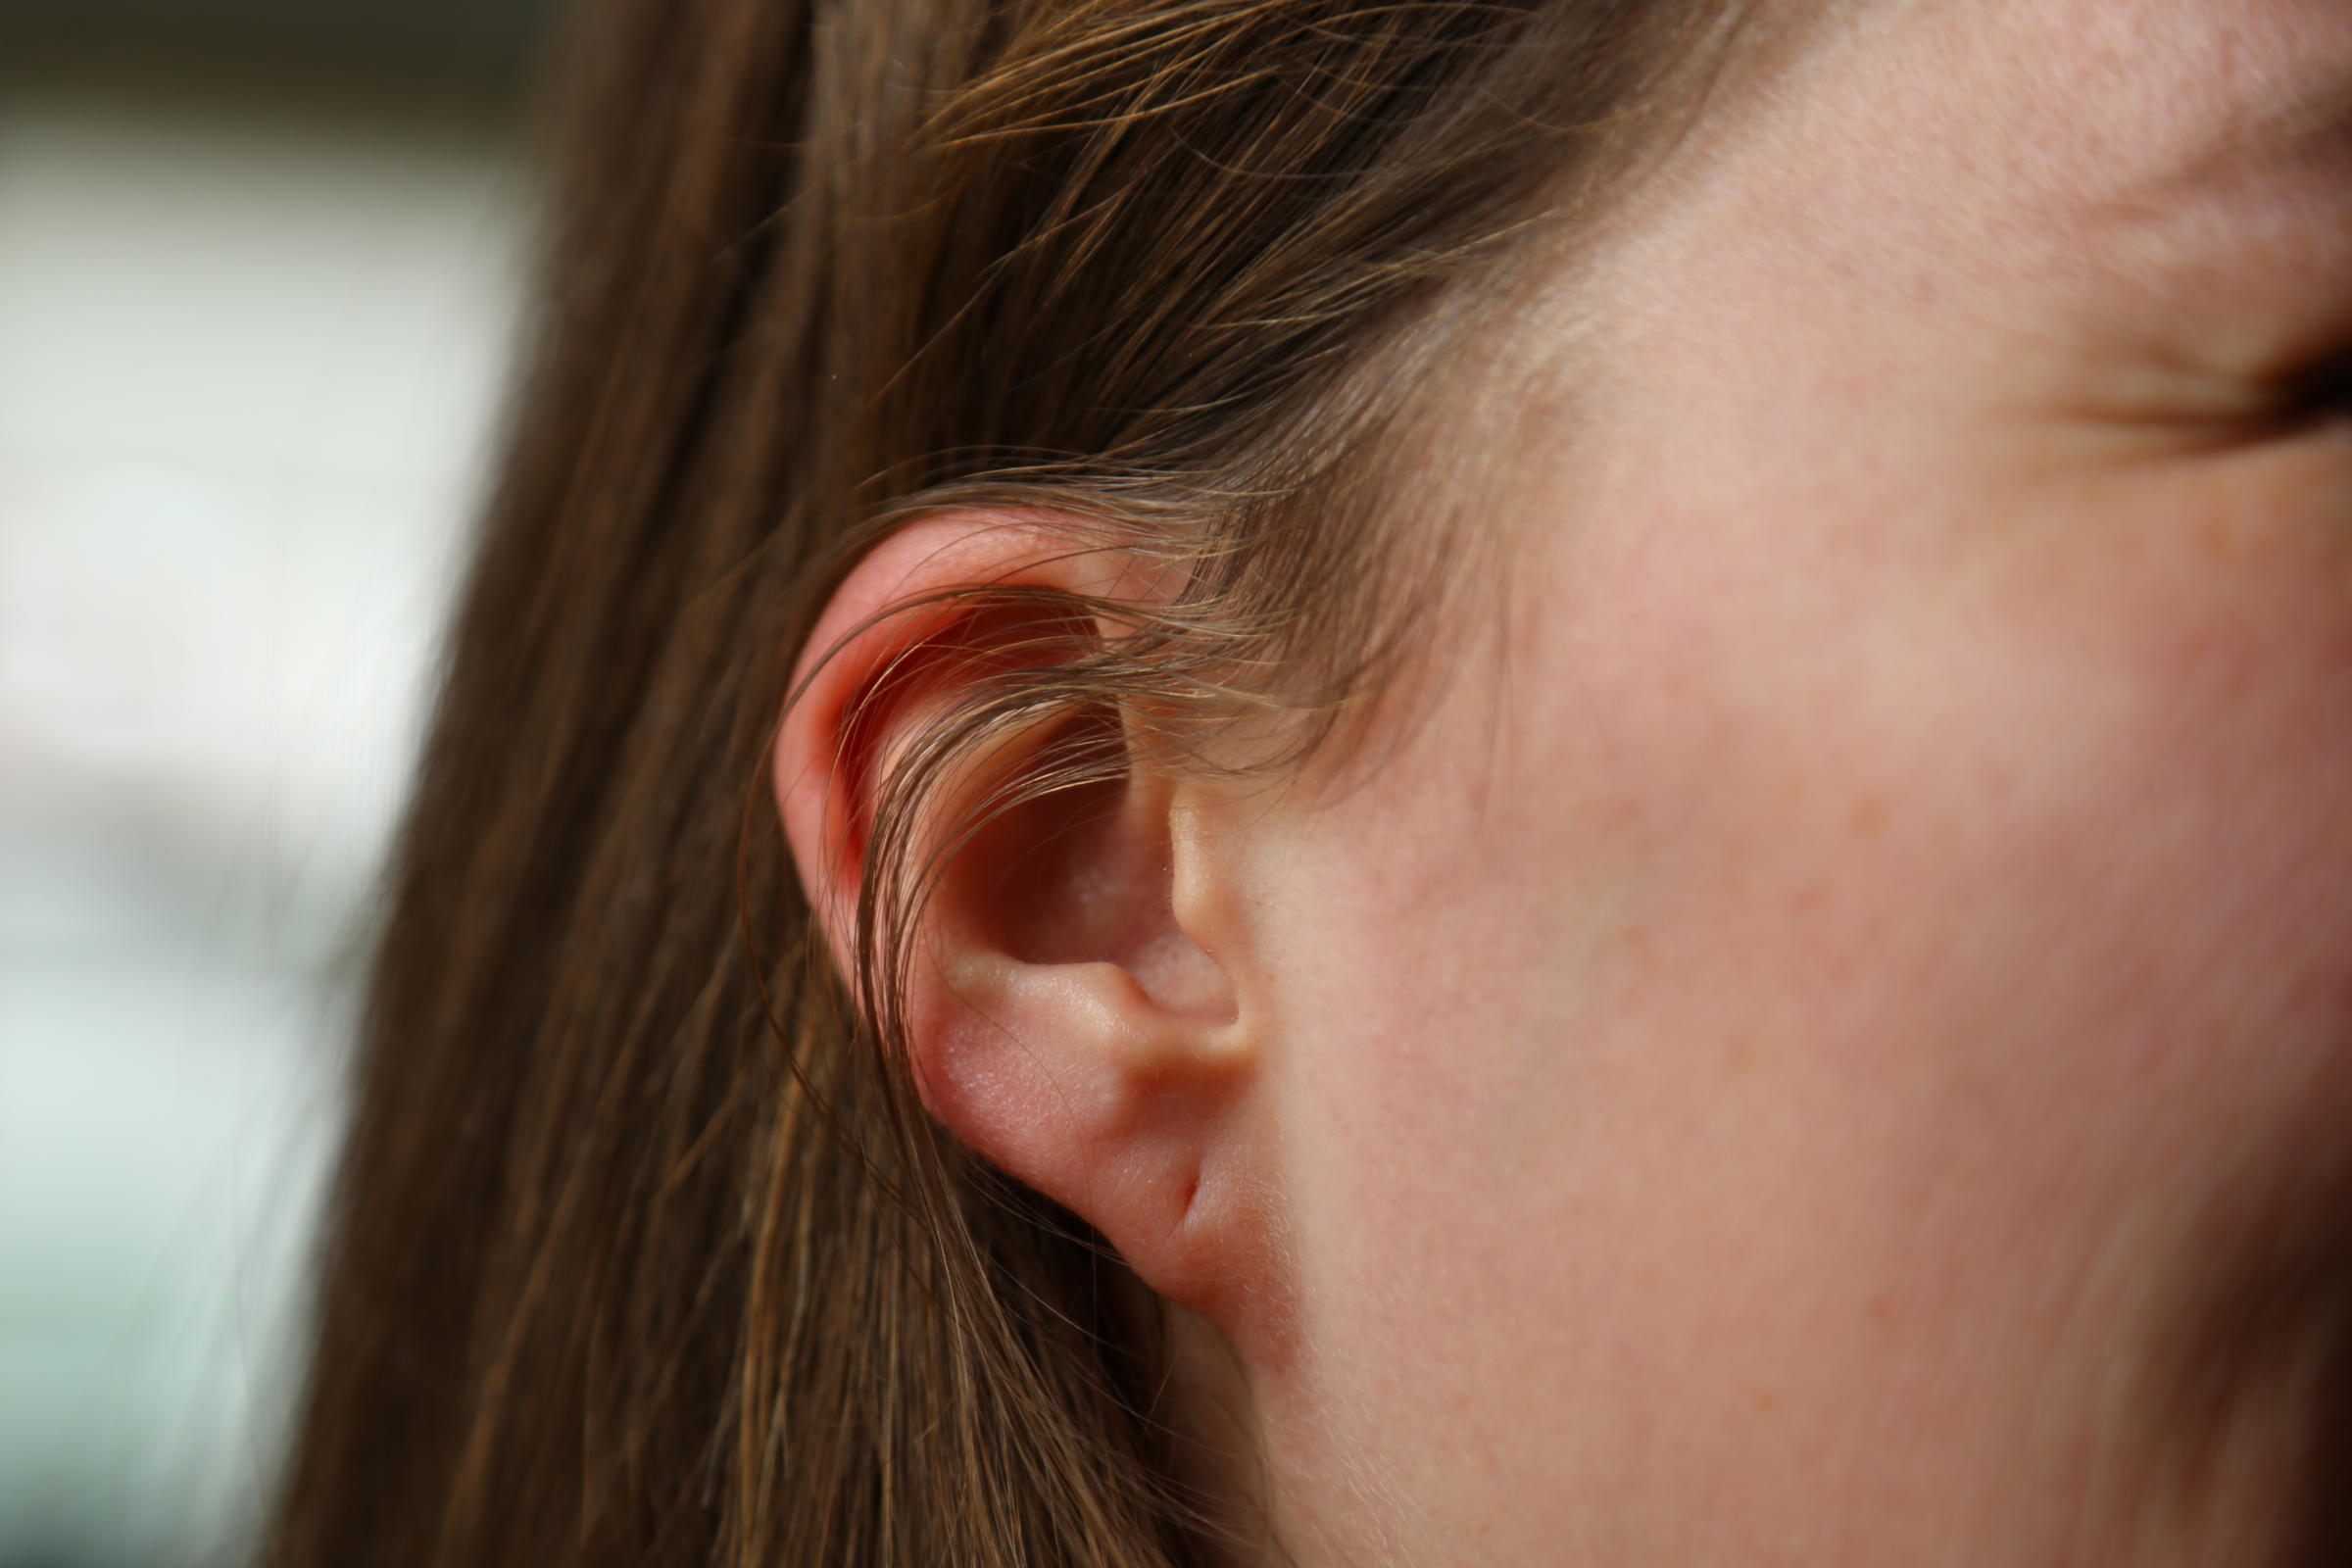 A new study from the University of Pittsburgh links ear lobe shape to  serious genetic syndromes.